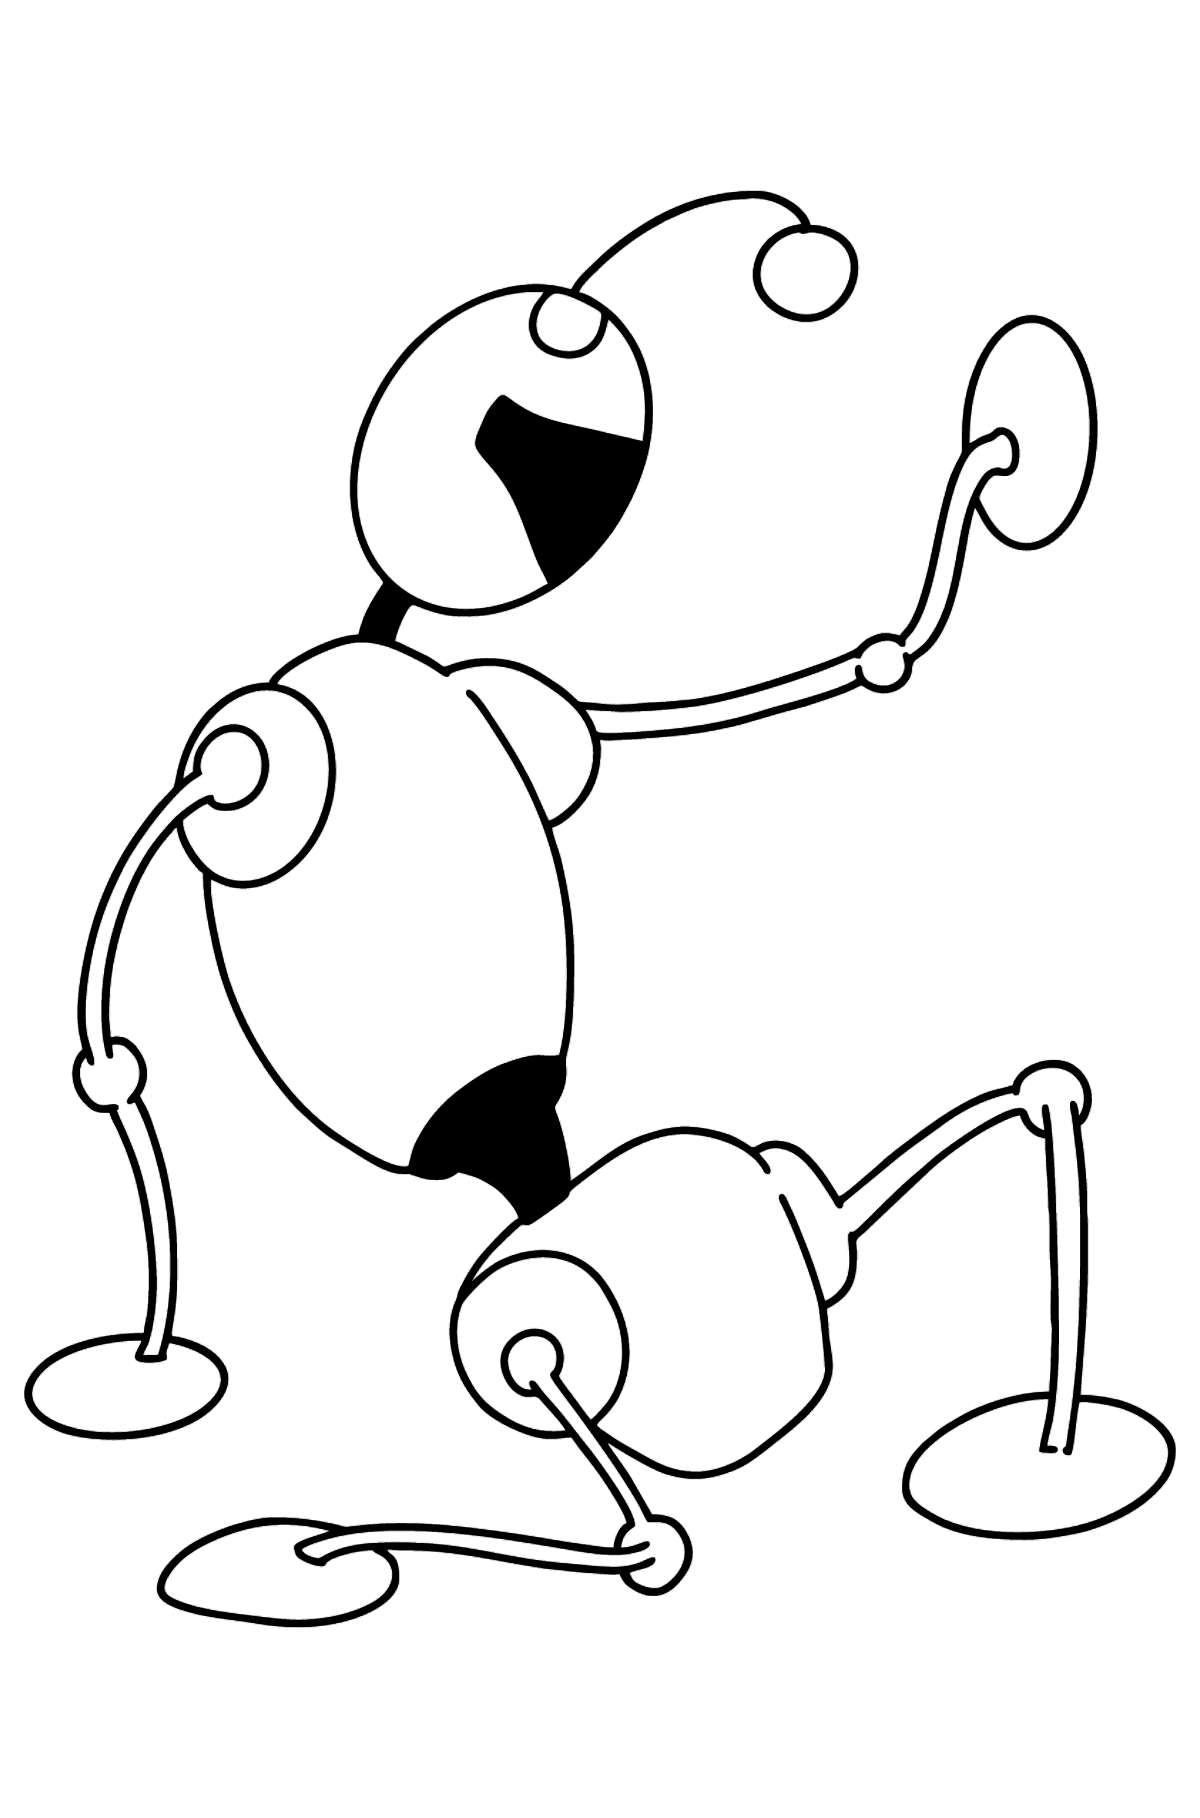 Funny Robot coloring page - Coloring Pages for Kids